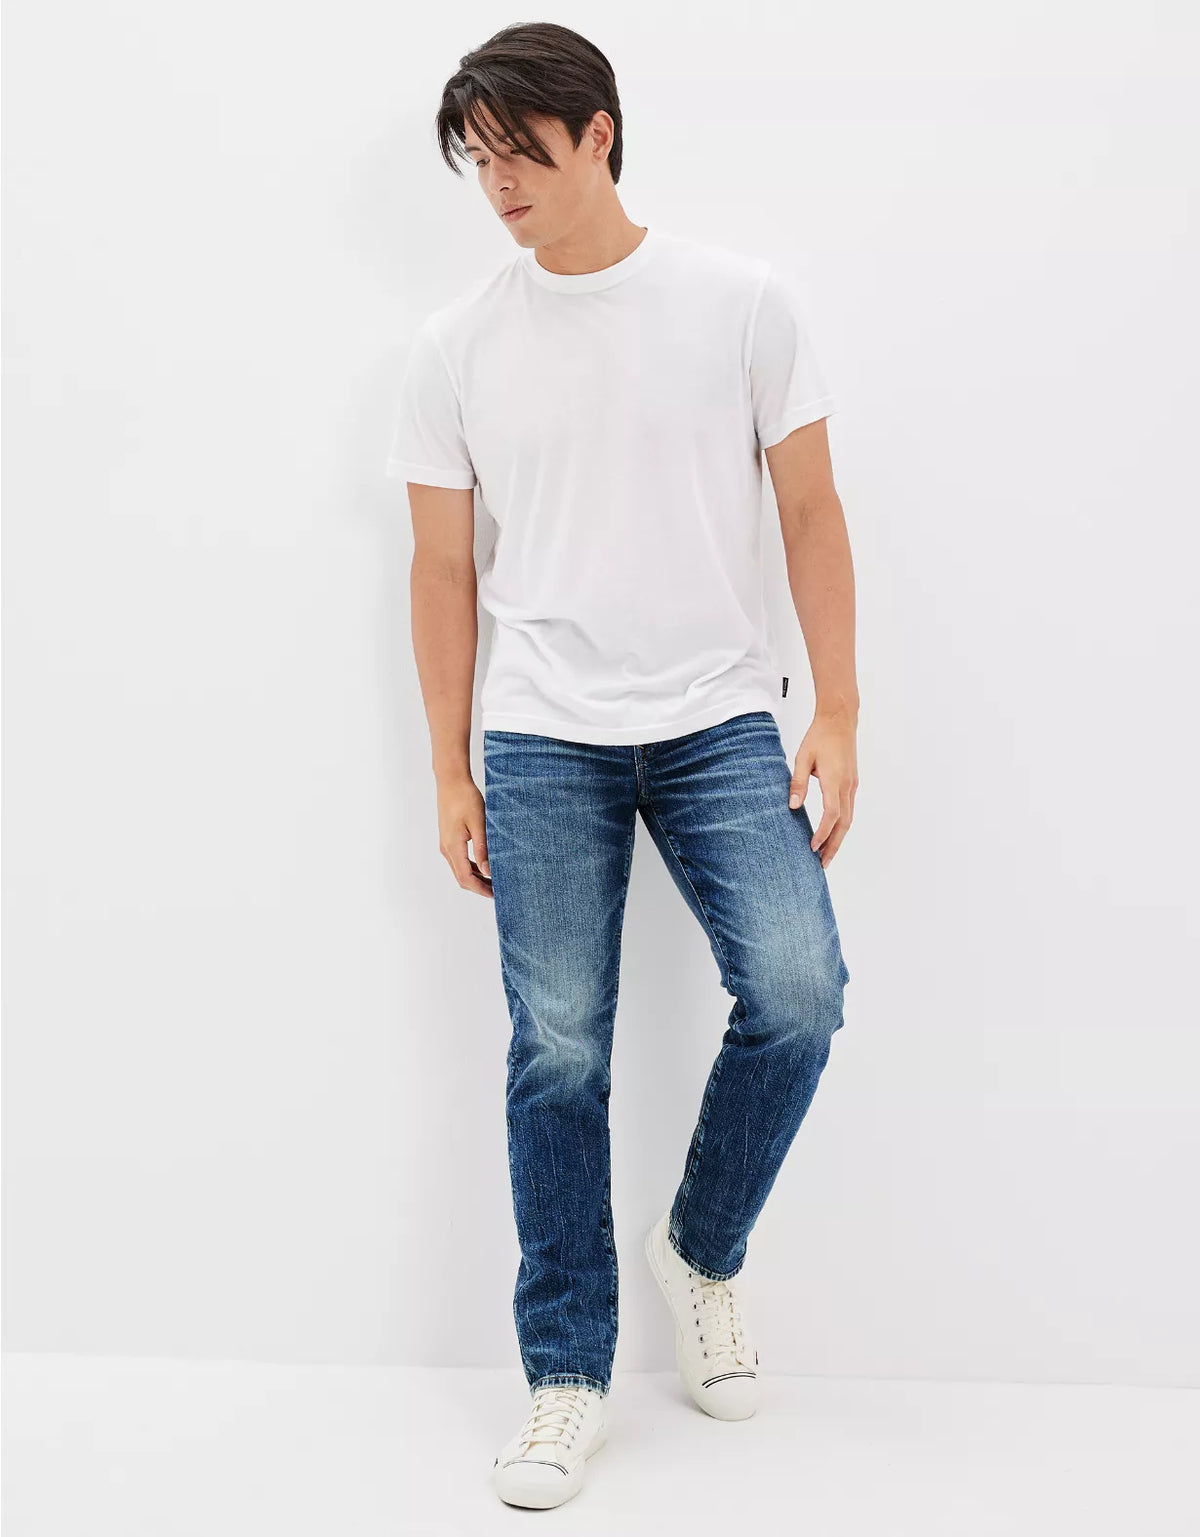 Flex Athletic Straight Jeans For Men - Stylish Men's Jeans - Available In Blue - AceCart